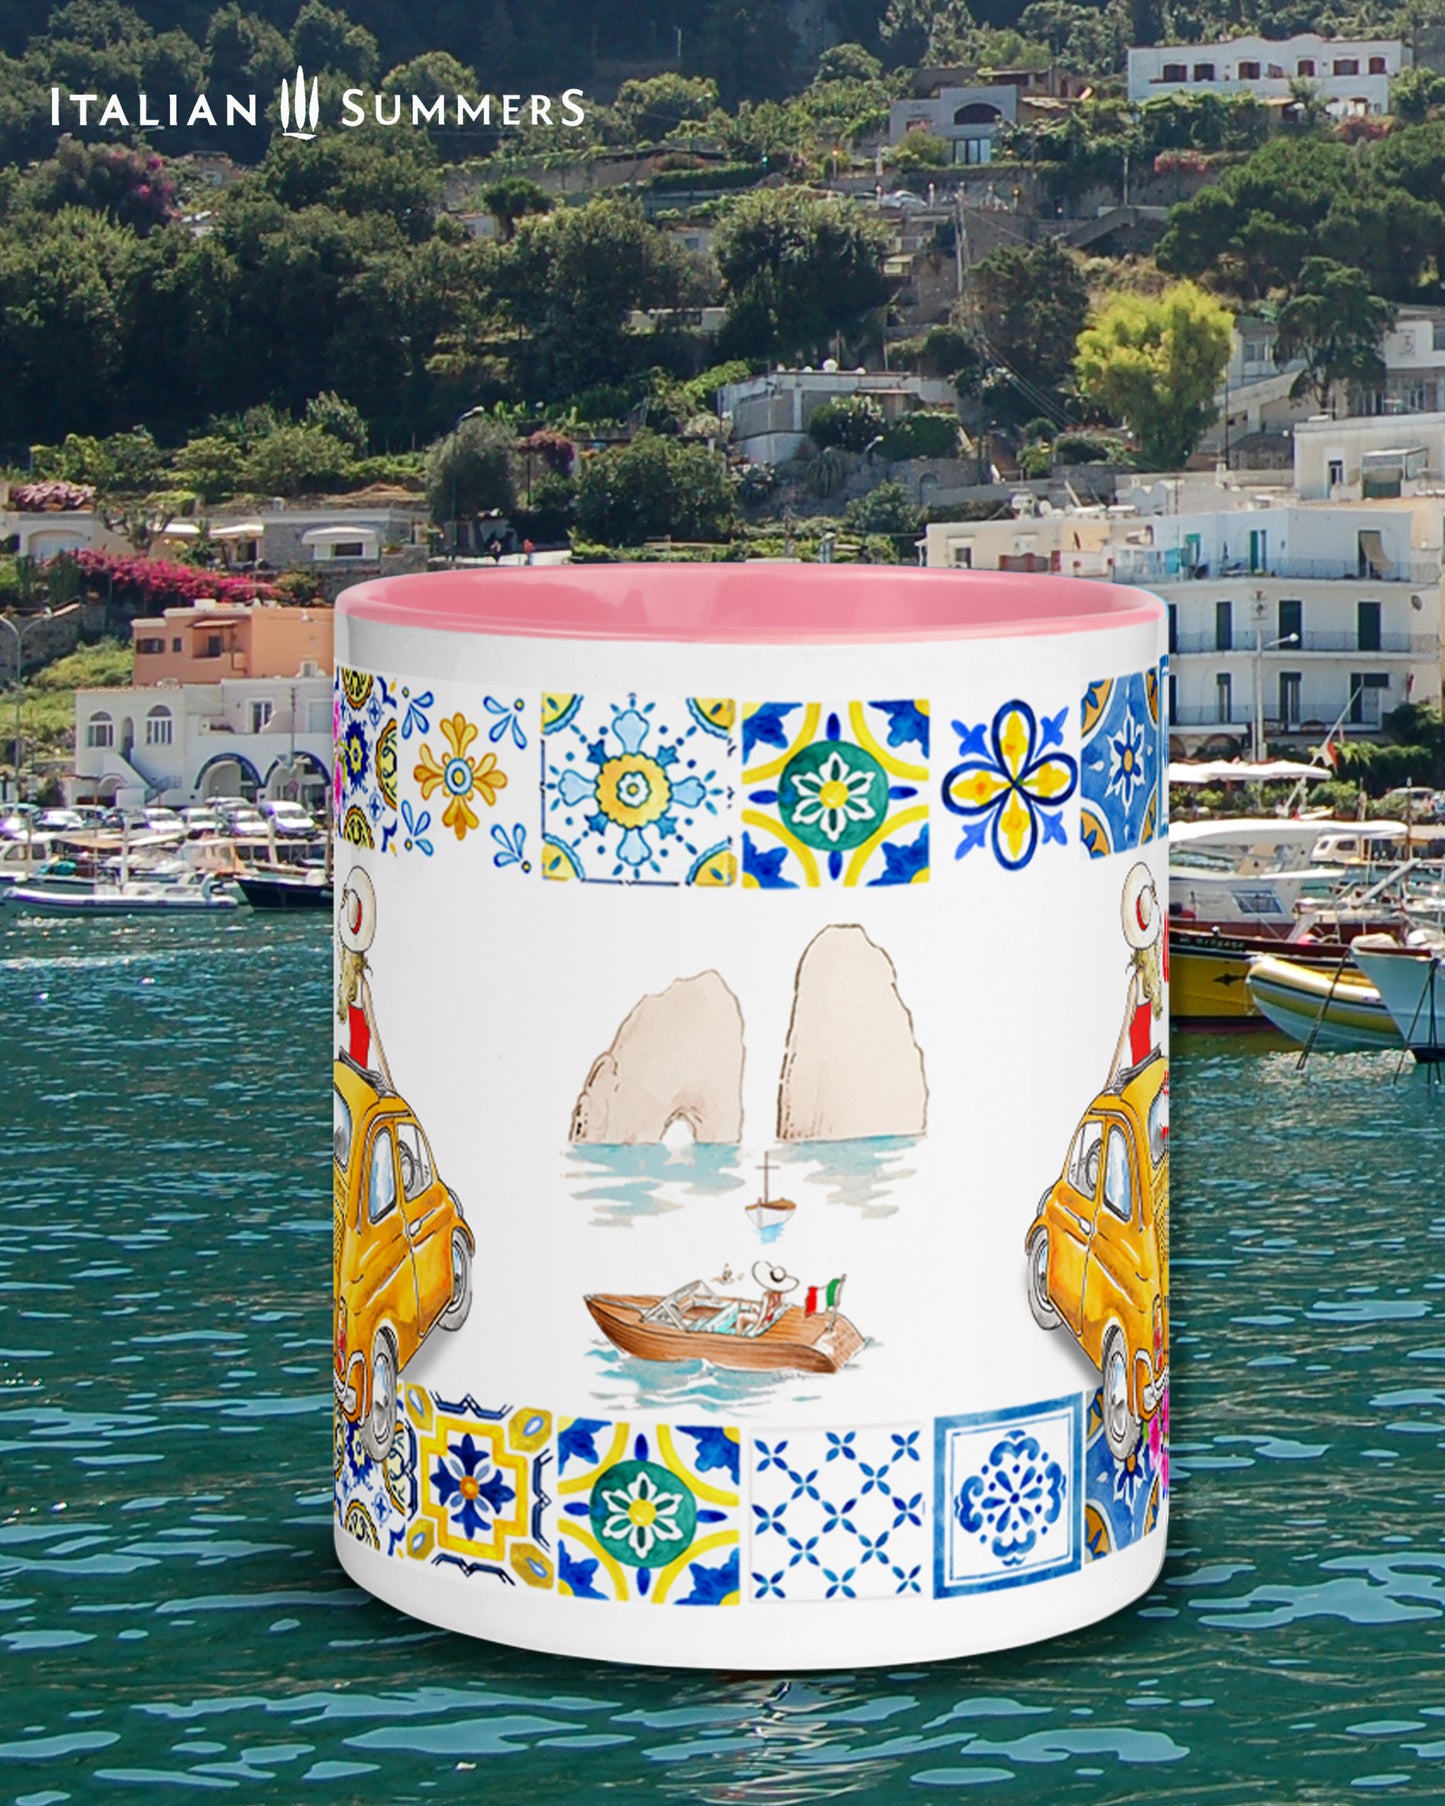 Capri inspired coffee mug with sketches of a yellow Cinquecento, the Faraglioni, a Riva and colorfu colorfull beach umbrellas. The rim is of the mug is decorated with Italian tiles and lemons. There is a lady in the Cinquecento who stand out of the sunroof. She has a hat and looks at the Faraglioni. Near the Yellow Cinquecento the is the writing Capri la Dolce Vita. The coffee mug is available with a colored inside and handle in the colors blue, yellow and pink. Made by Italian Summers.